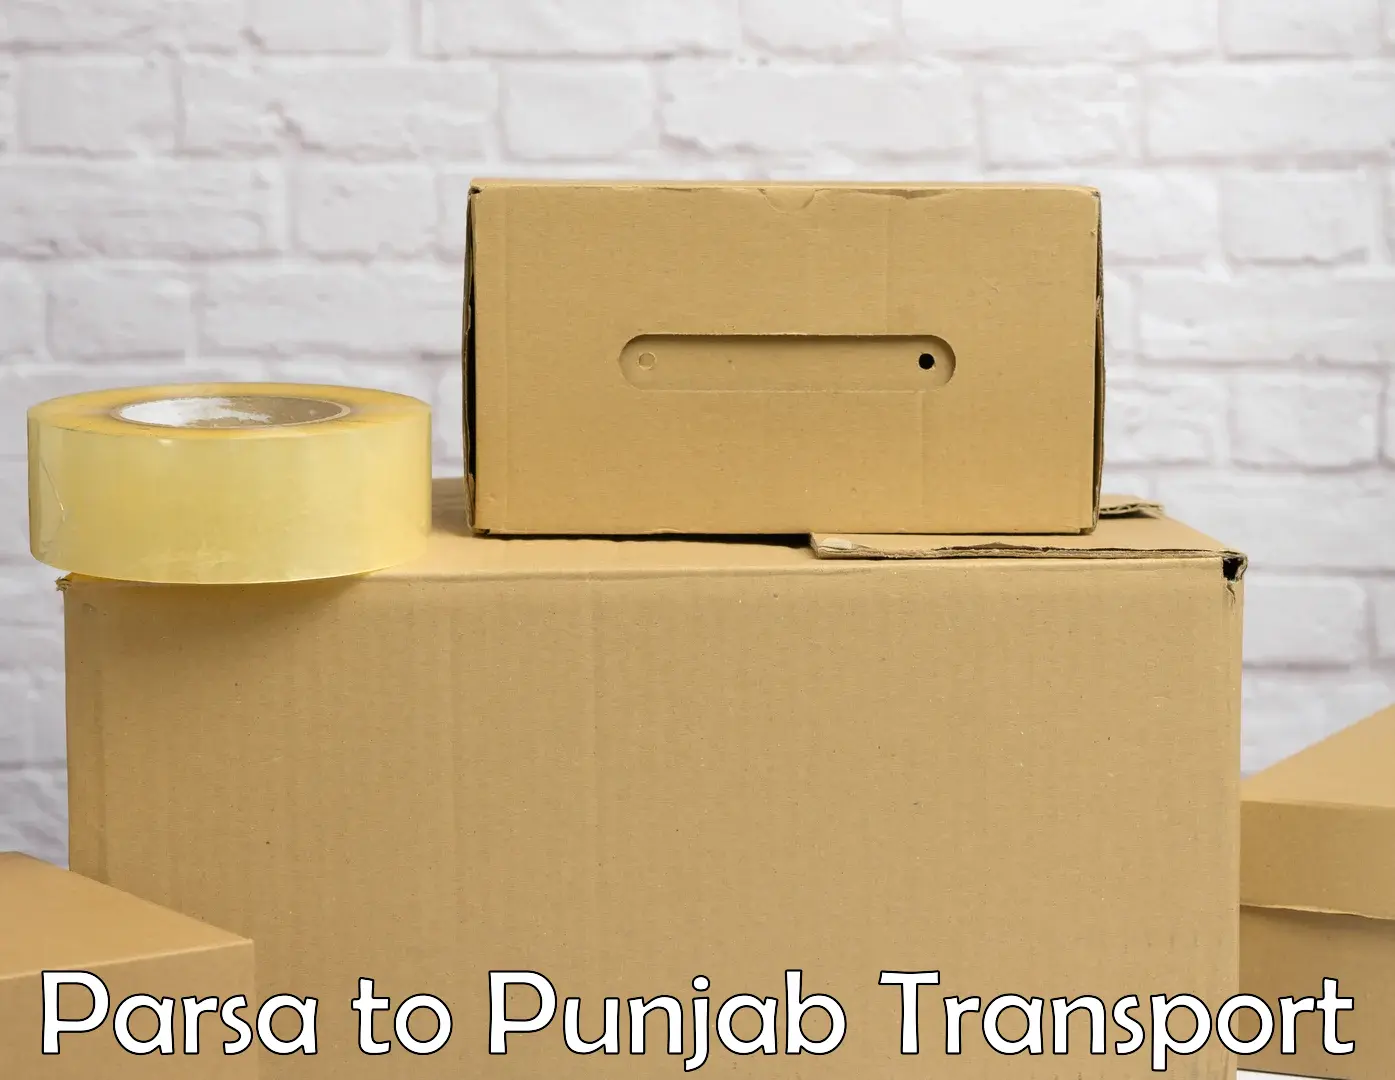 Air freight transport services Parsa to Faridkot